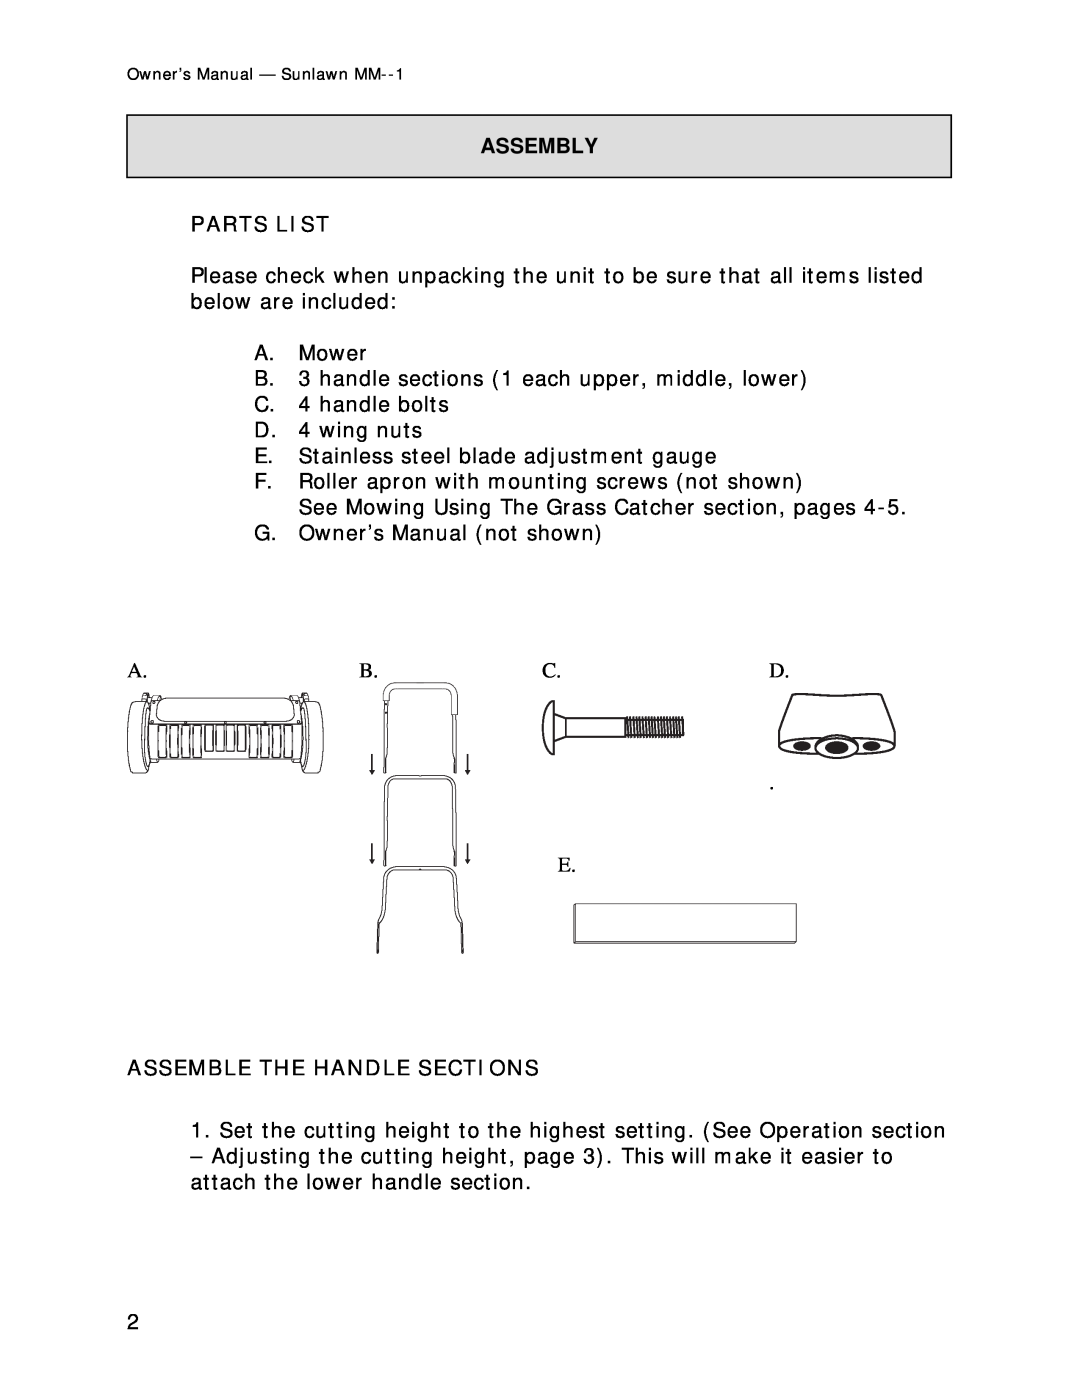 Reel Mowers, Etc MM-1 owner manual Parts List, Assemble The Handle Sections, Assembly 